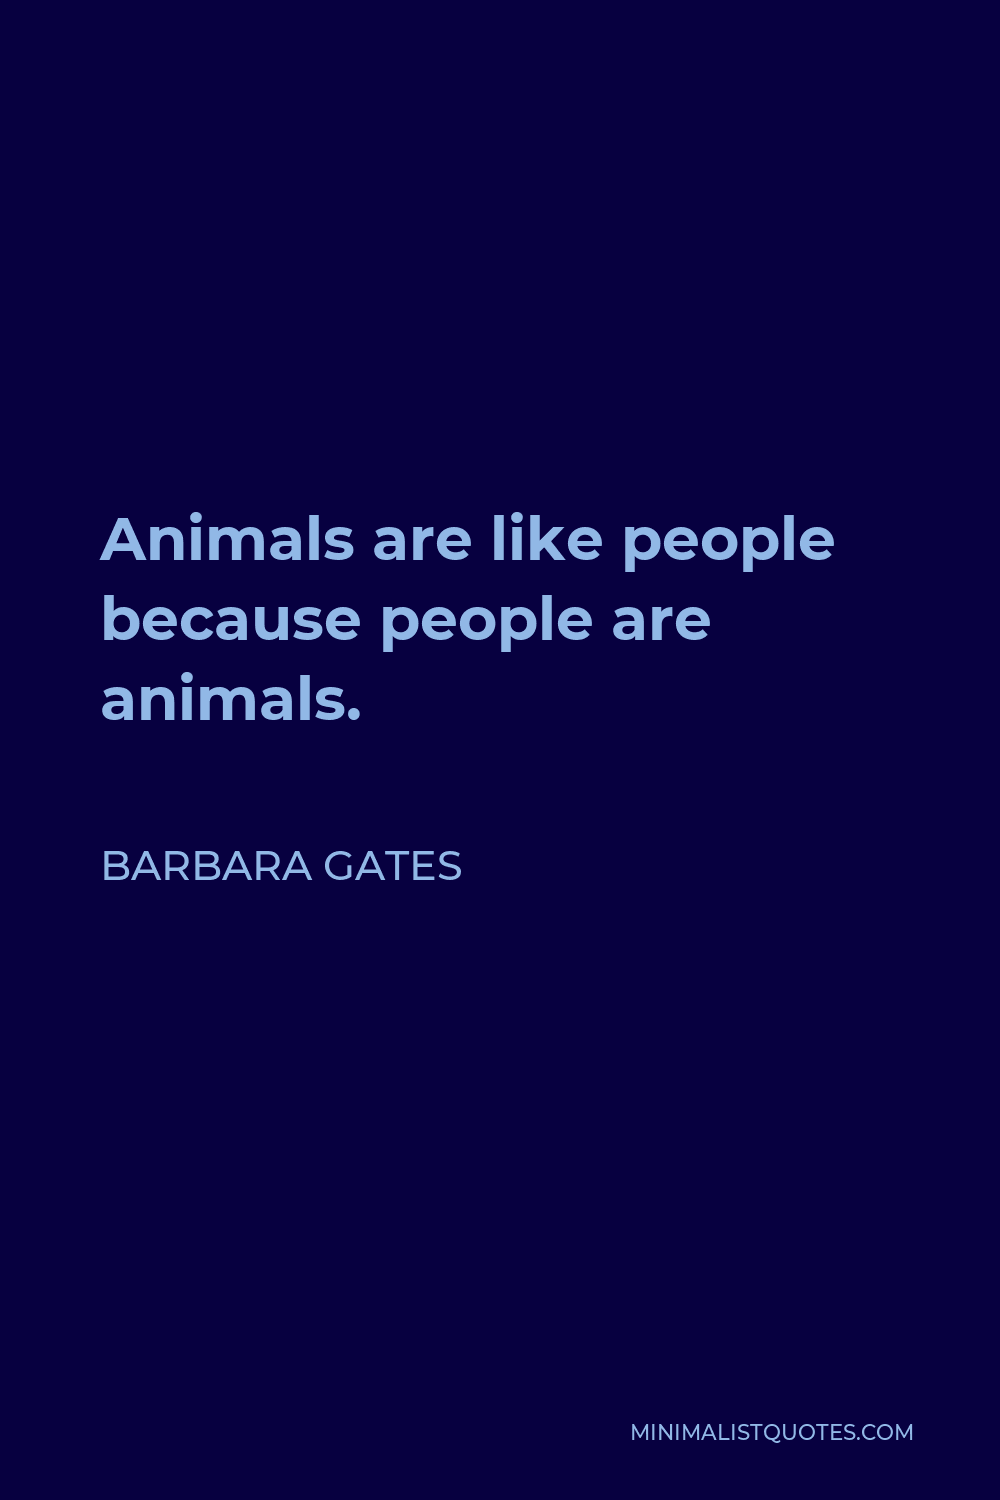 Barbara Gates Quote - Animals are like people because people are animals.